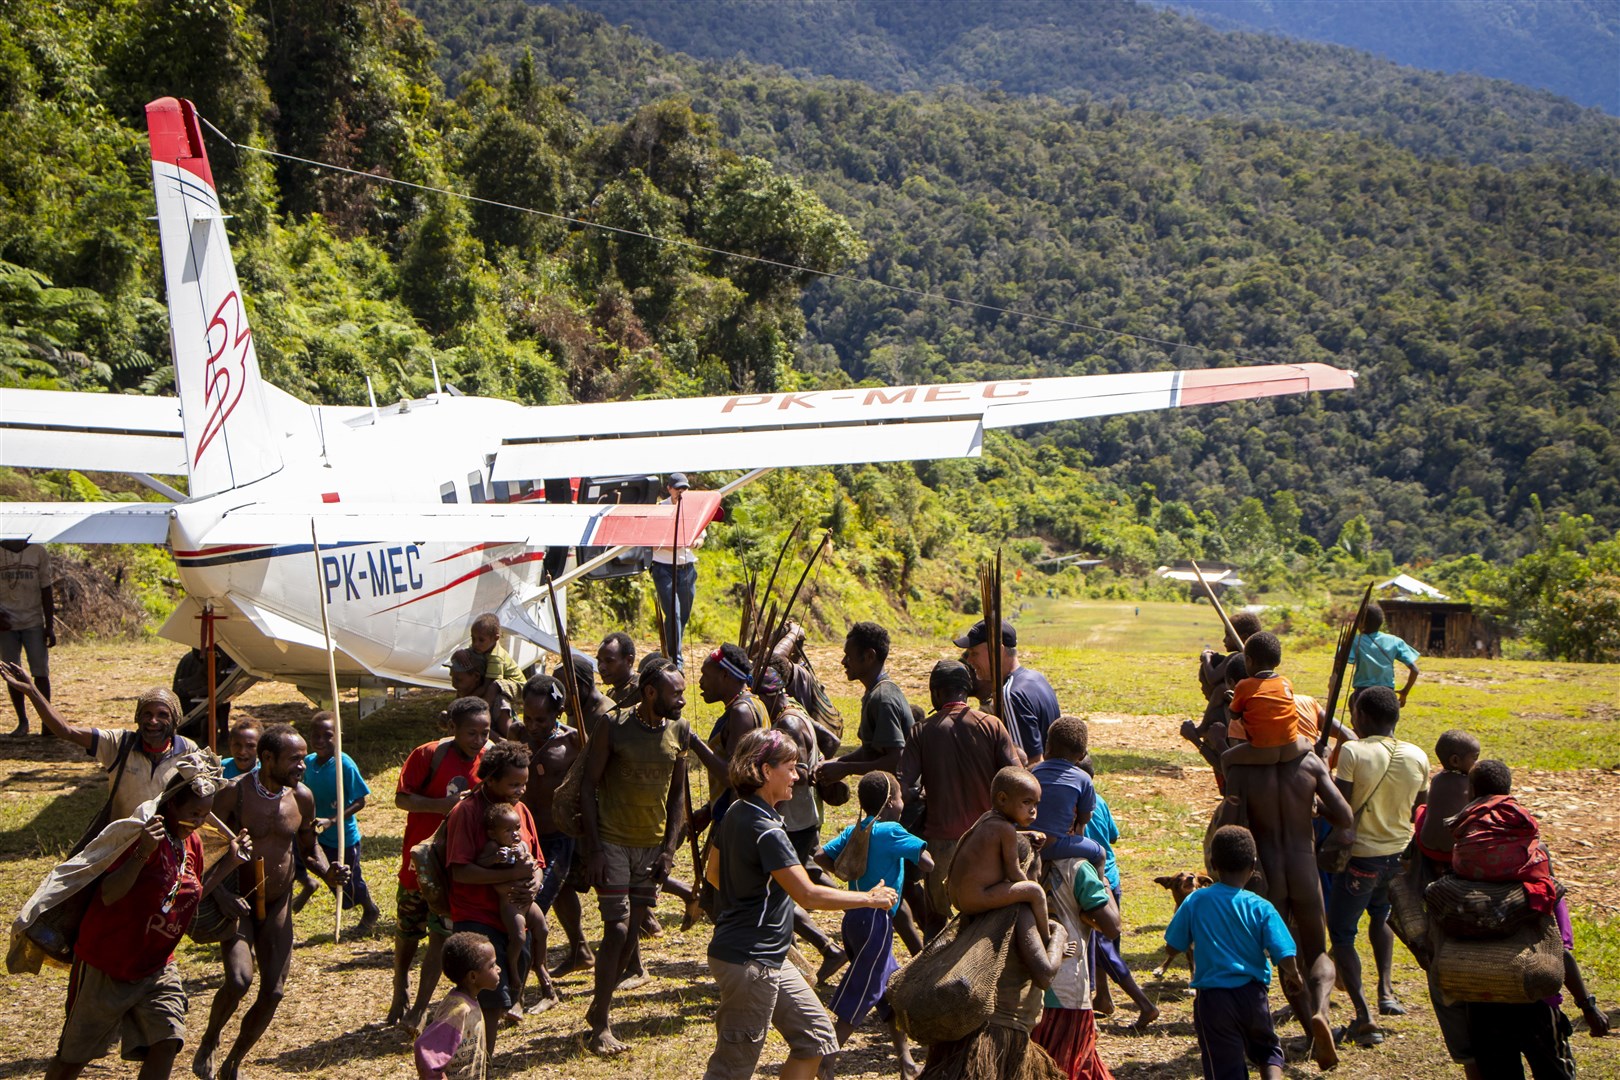 The Moi from Daboto in Papua, Indonesia circle dance on the airstrip along with Bible translators Stephen and Carolyn Crockett